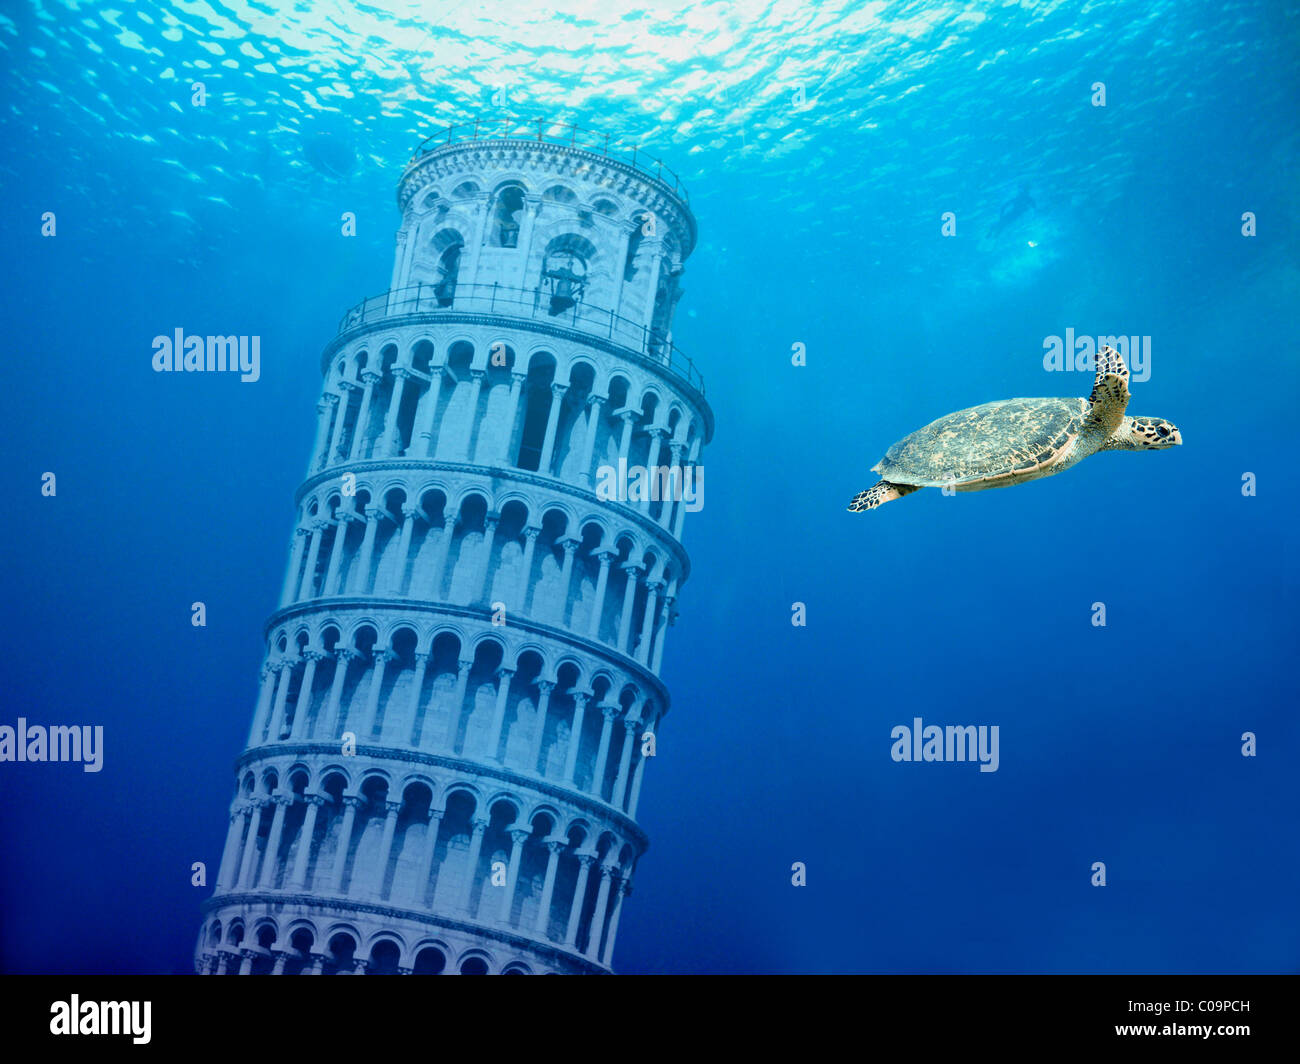 Leaning Tower of Pisa under water, symbolic image for future sea level rise Stock Photo